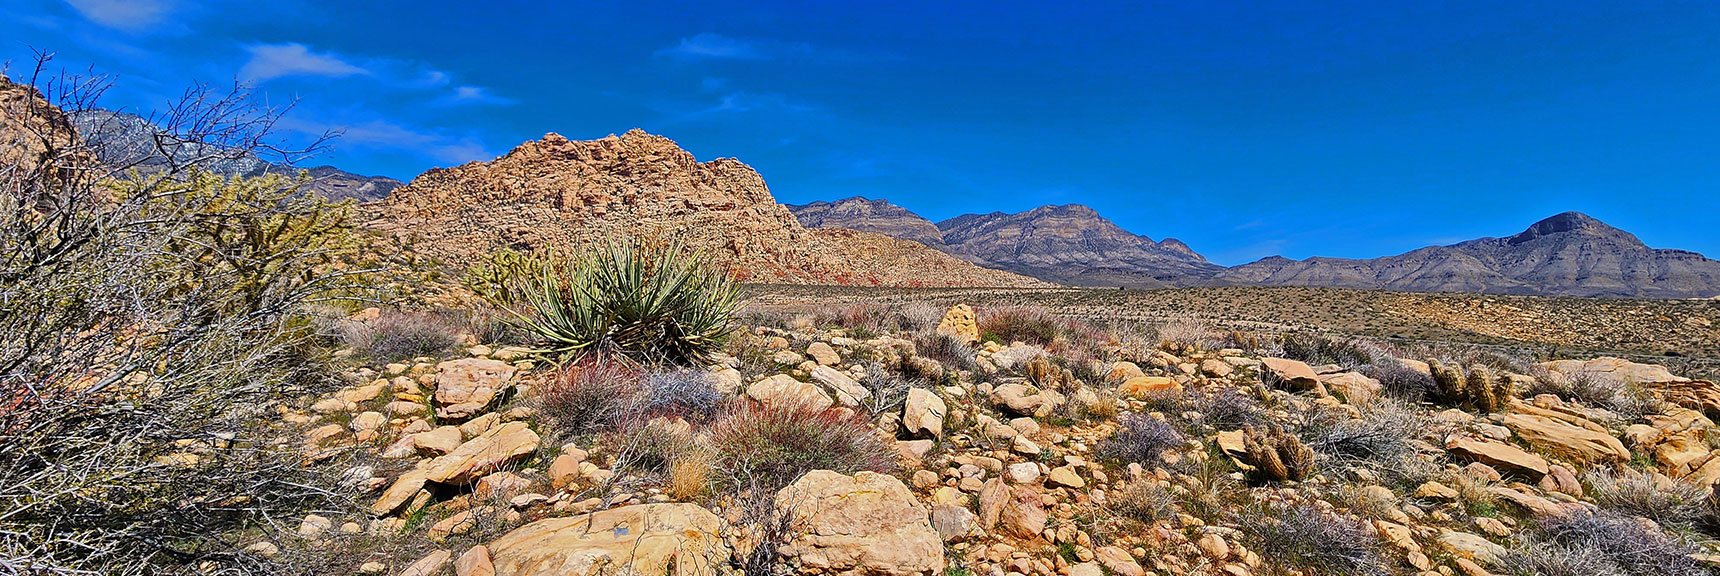 Target: Willow Spring at White Rock Mountain. La Madre Mountains Cliffs Far Background | SMYC Trail | Red Rock Canyon National Conservation Area, Nevada | David Smith | LasVegasAreaTrails.com